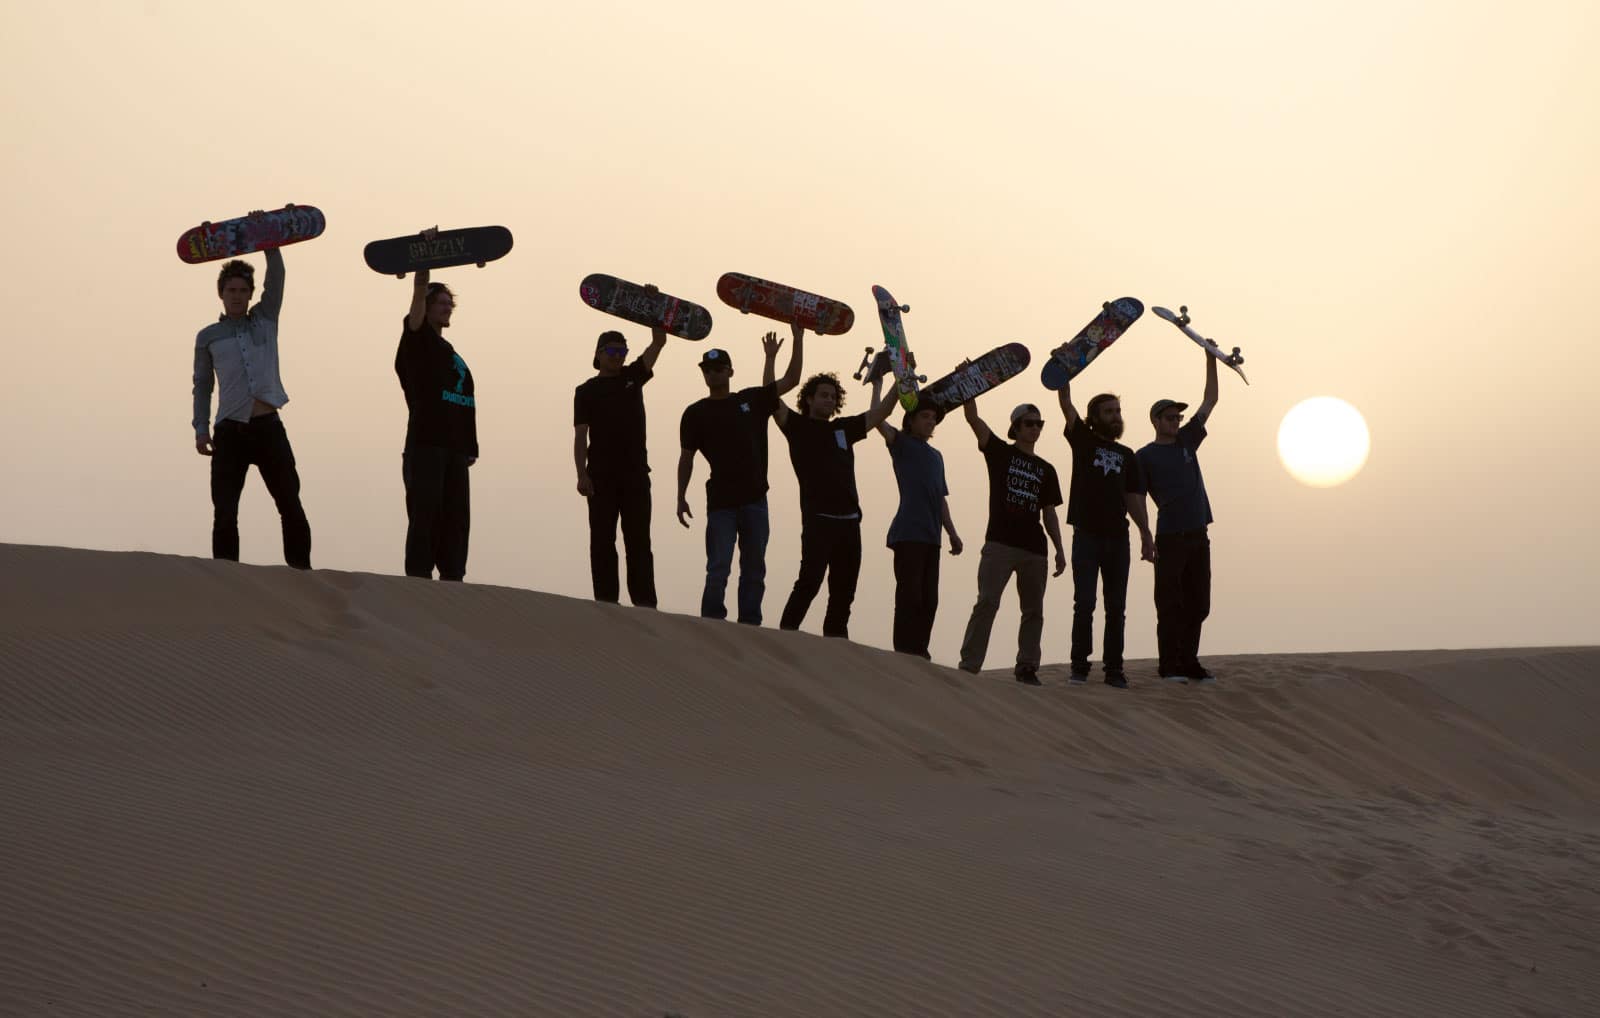 skateboarders on a sand dune holding boards in the air